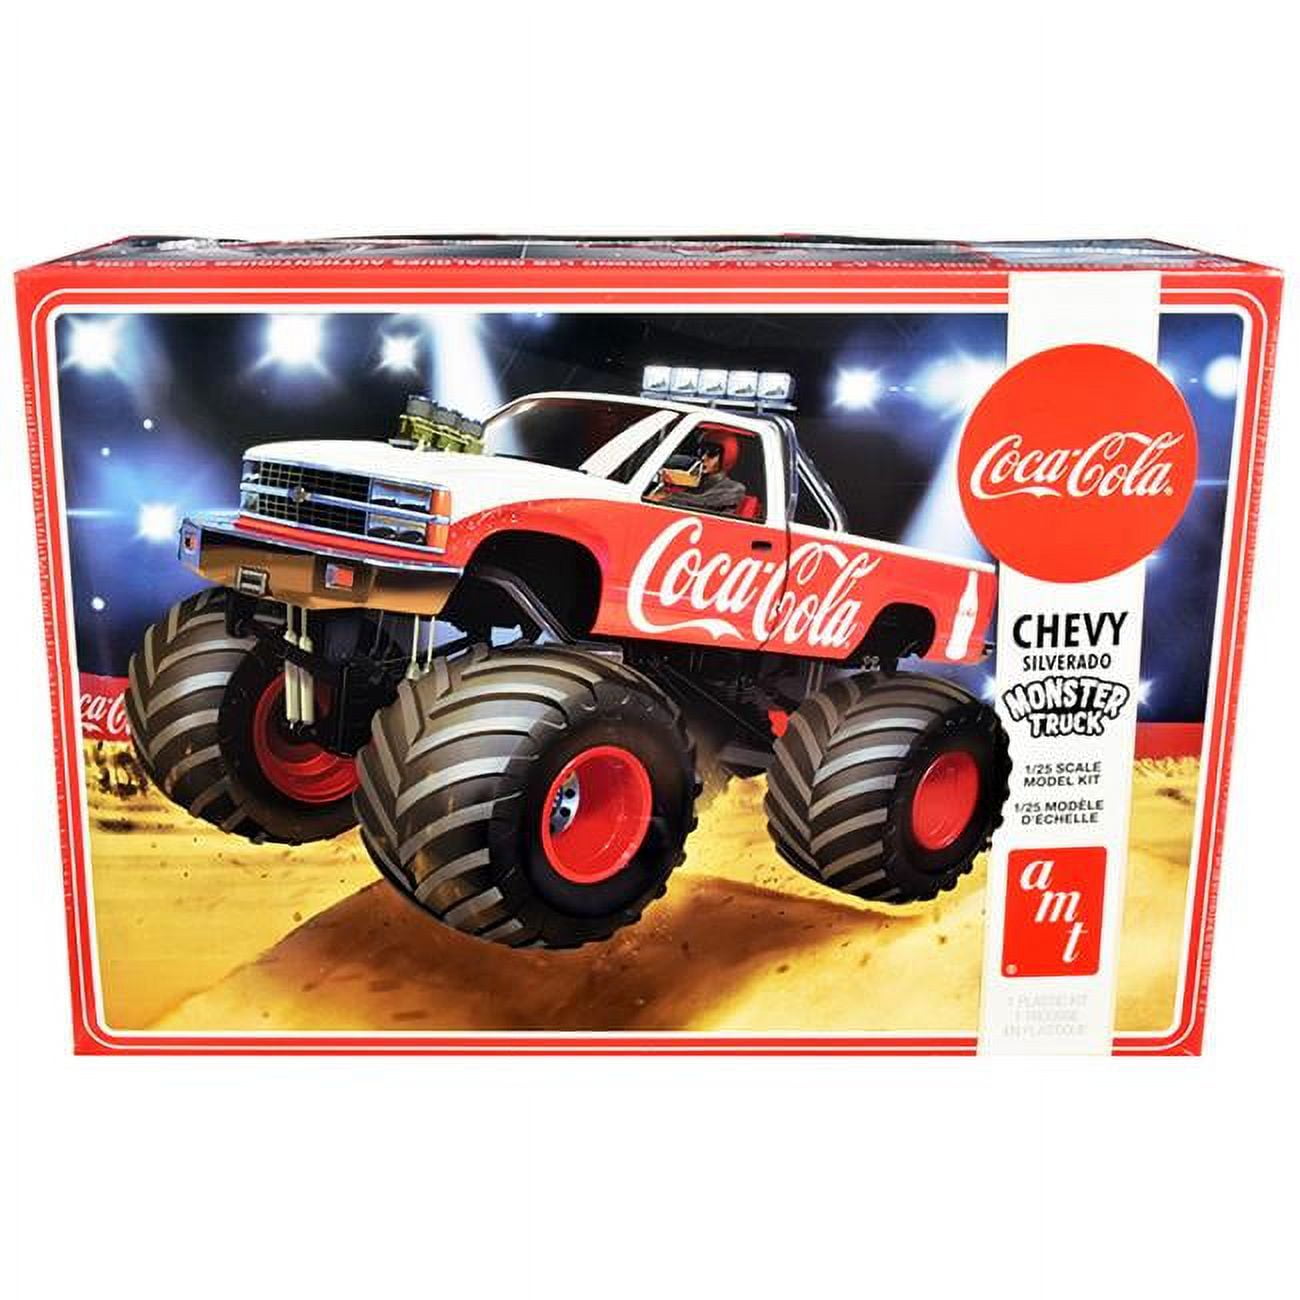 Picture of AMT AMT1184M Skill 2 Model Chevrolet Silverado Monster Truck Coca-Cola Kit for 1 by 25 Scale Model